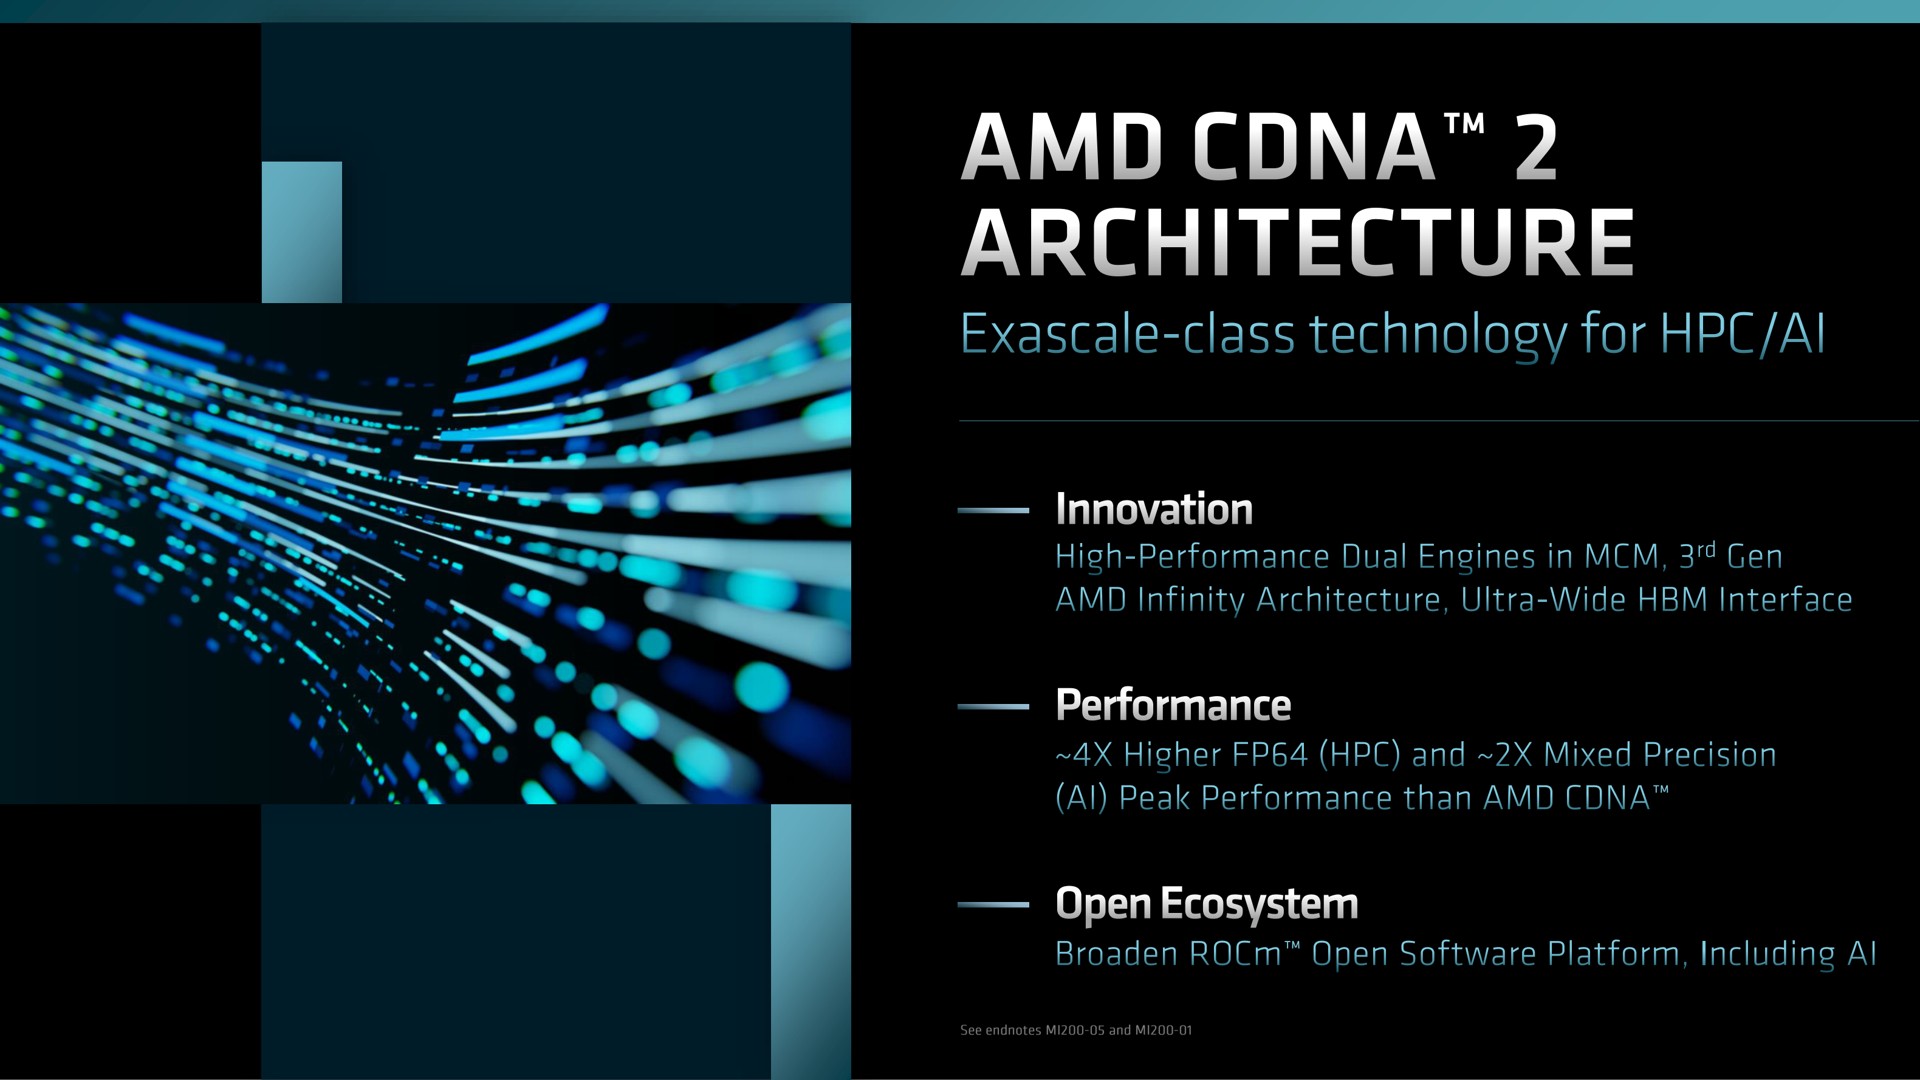 architecture class technology for | AMD